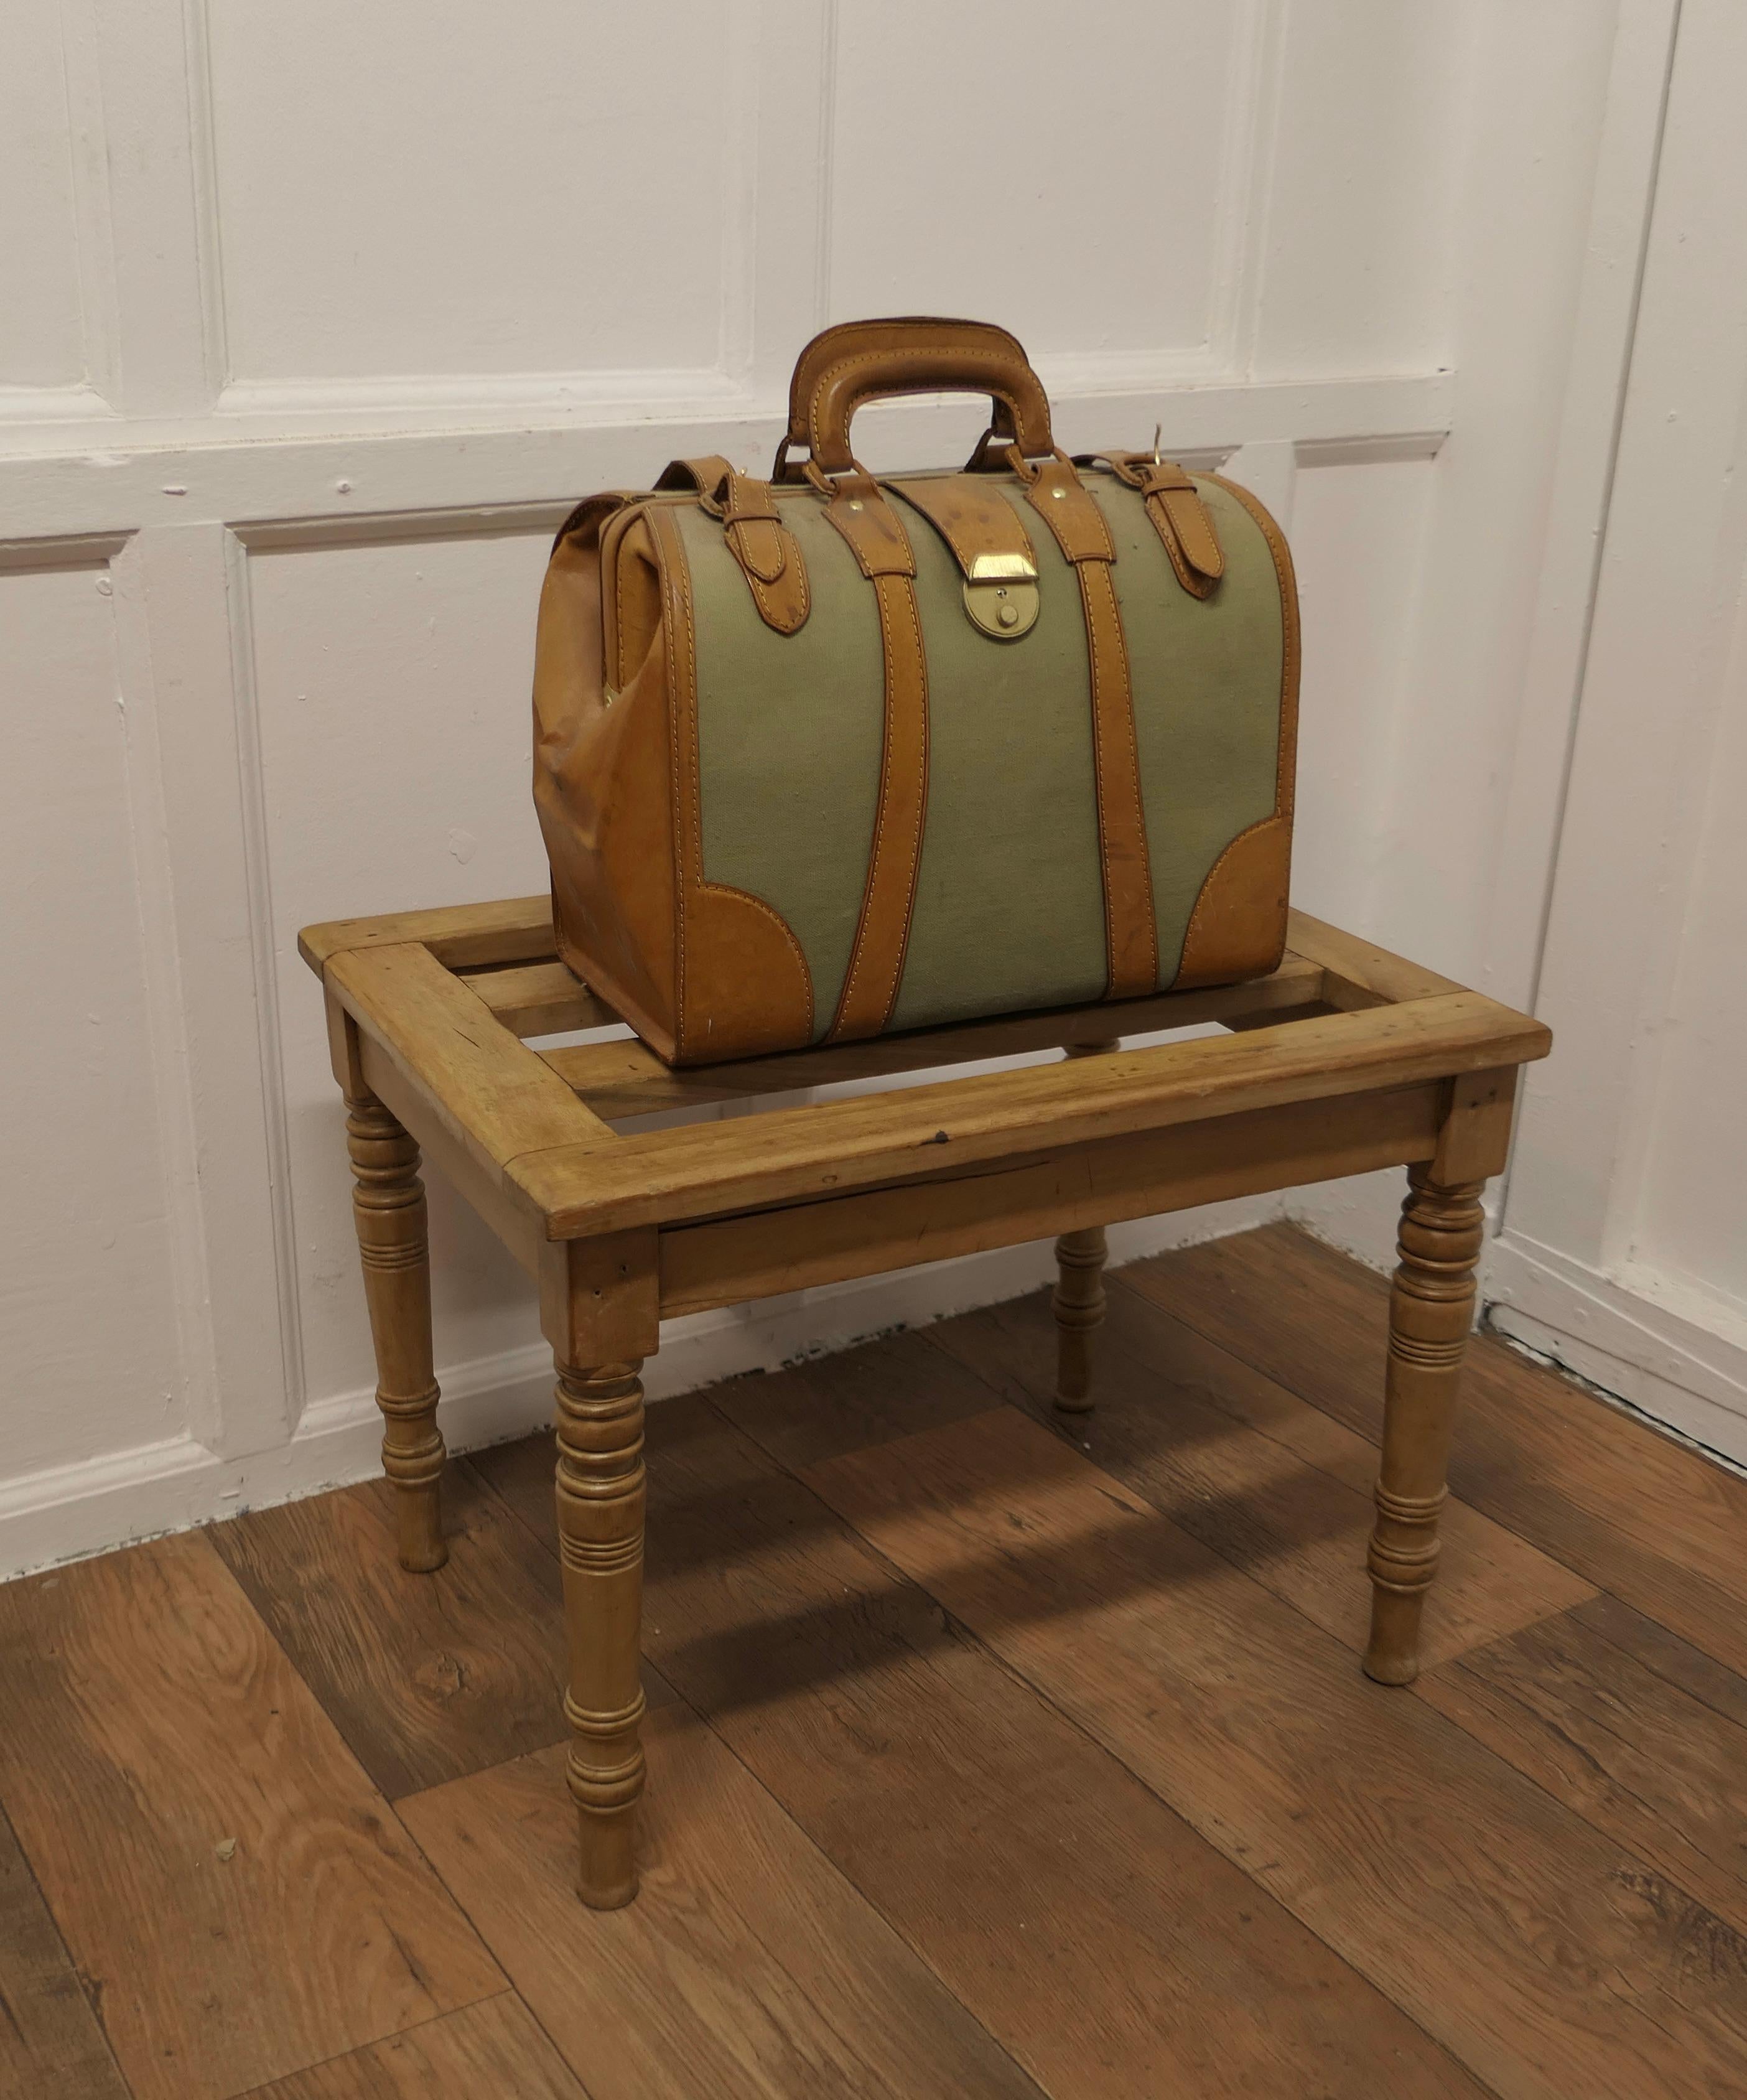 A Good Quality Victorian Walnut Luggage Rack, Suitcase Stand

This is a Superb Heavy Quality Victorian Walnut Luggage Rack, Suitcase Stand, it has a Slatted top and elegant turned legs  
This is a good and very sturdy piece with a light polished